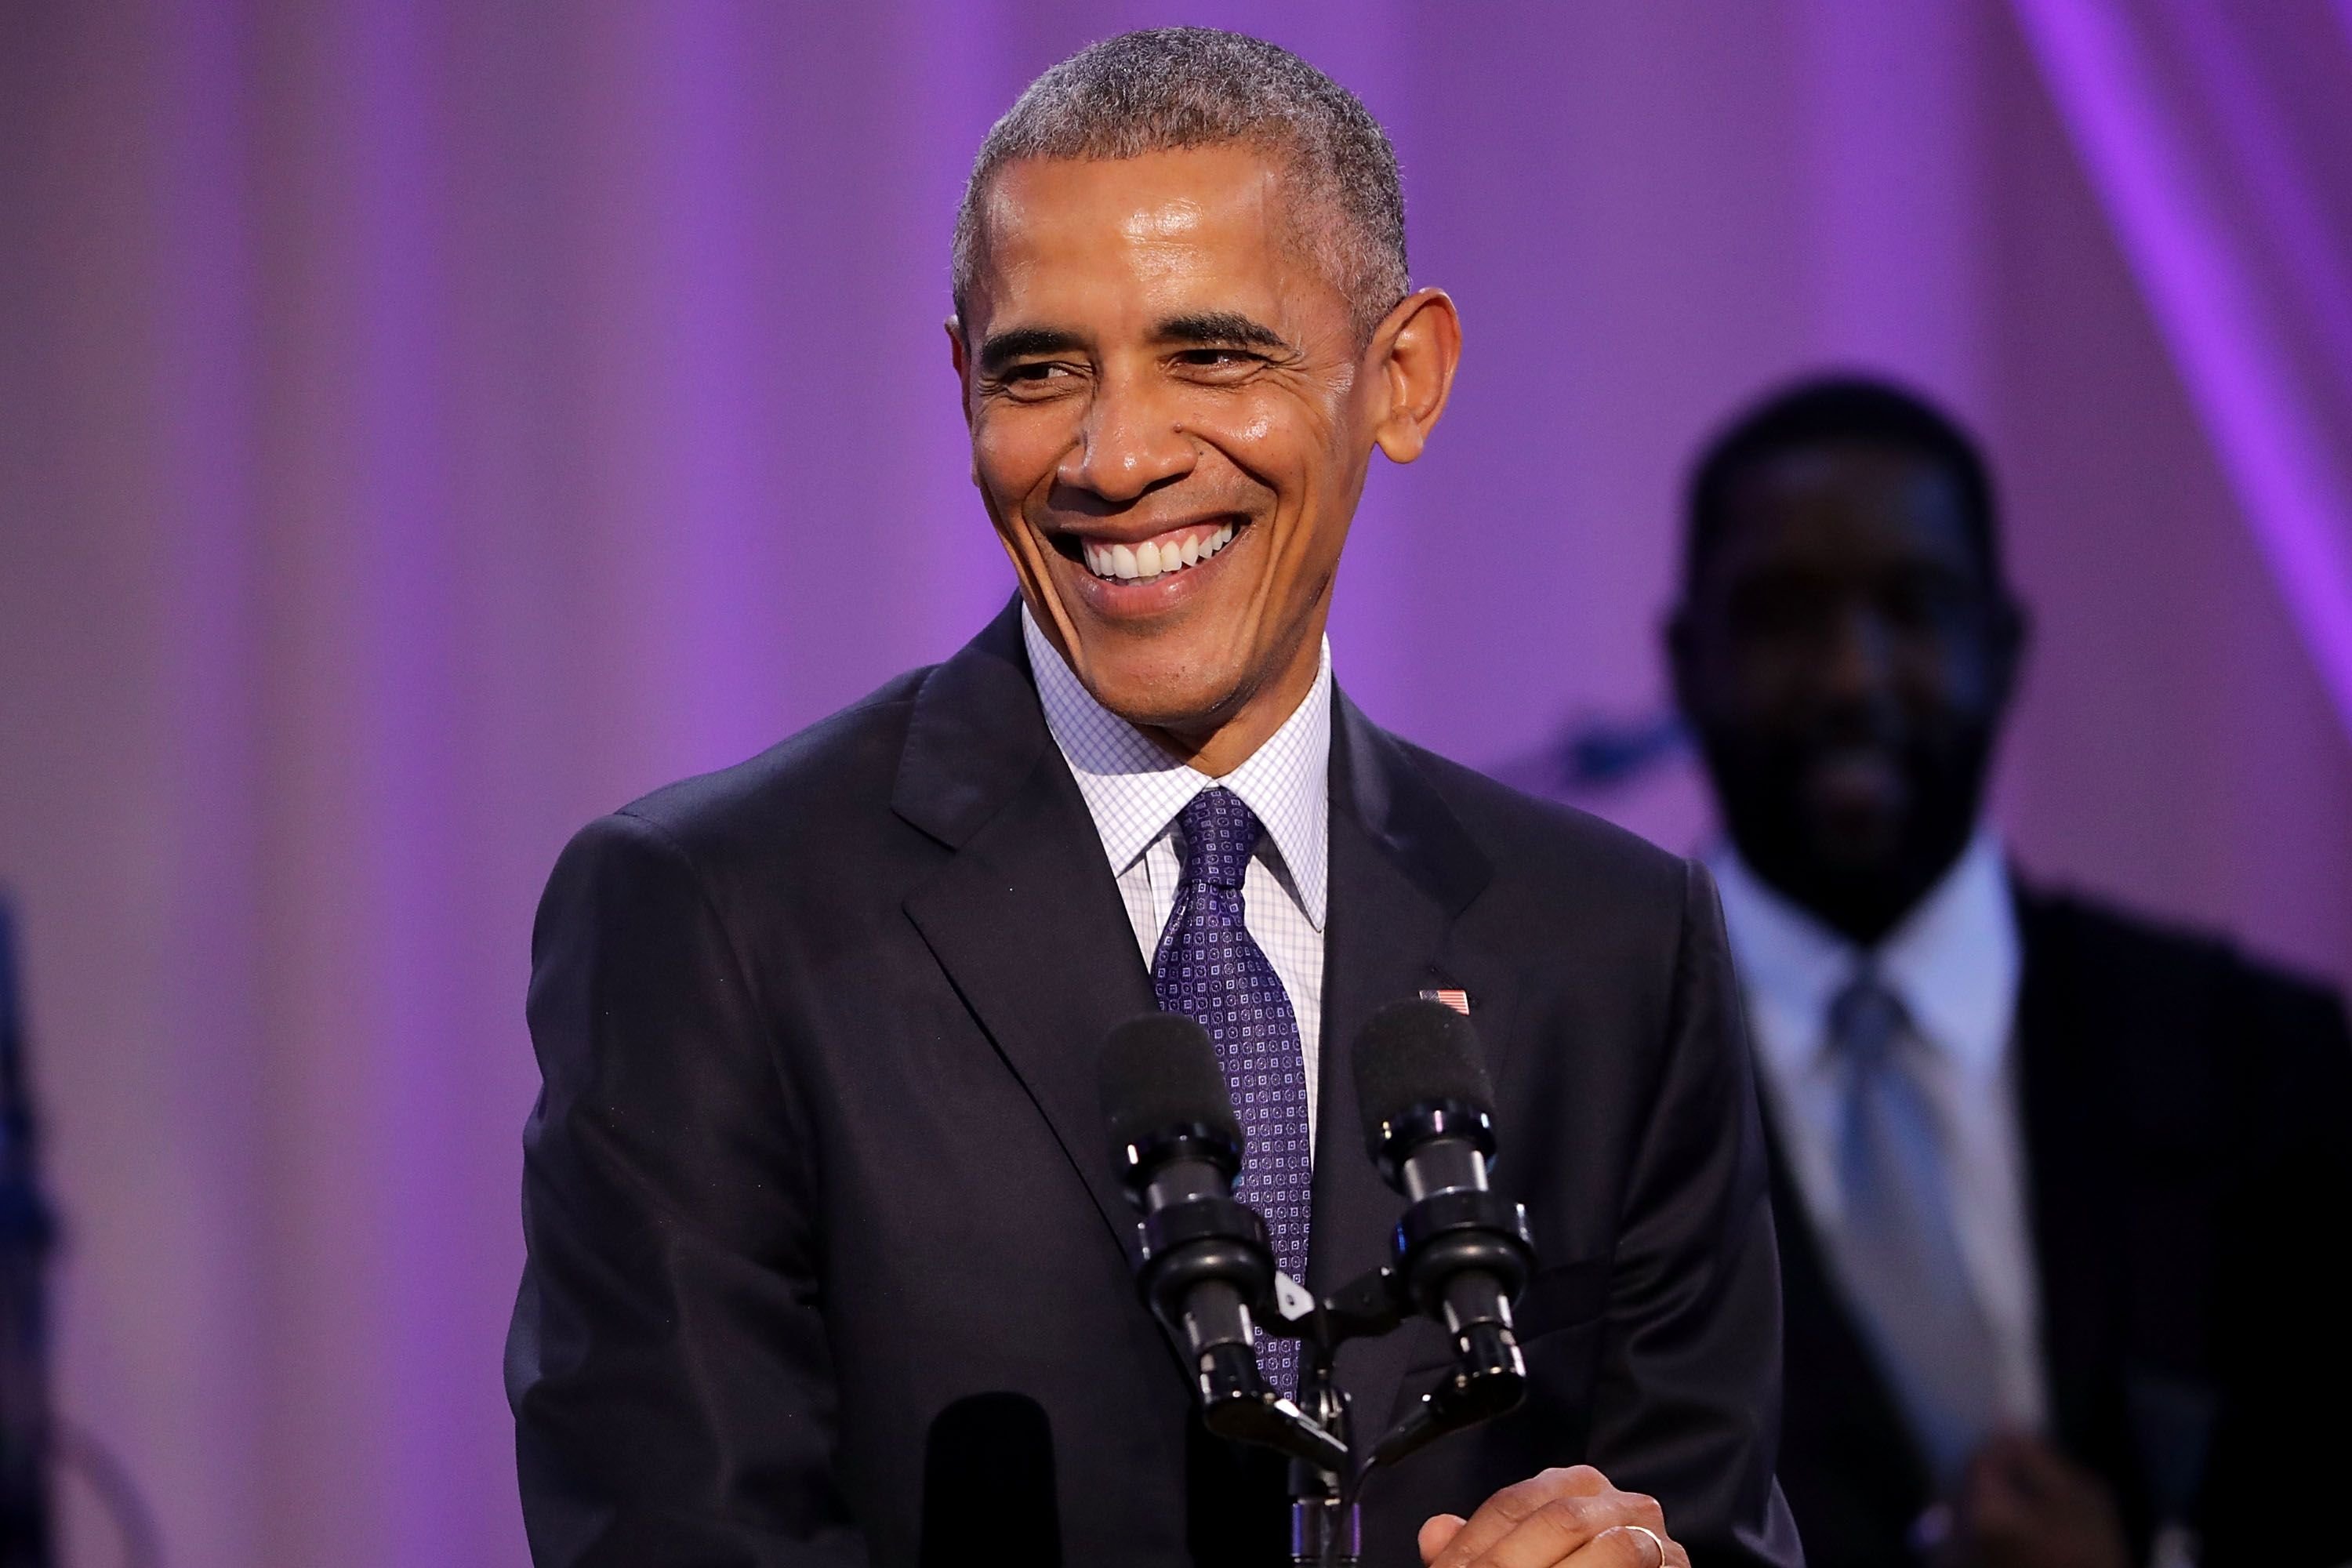 Barack Obama delivers remarks at the BET's 'Love and Happiness: A Musical Experience" in a tent on the South Lawn of the White House October 21, 2016. | Photo: Getty Images